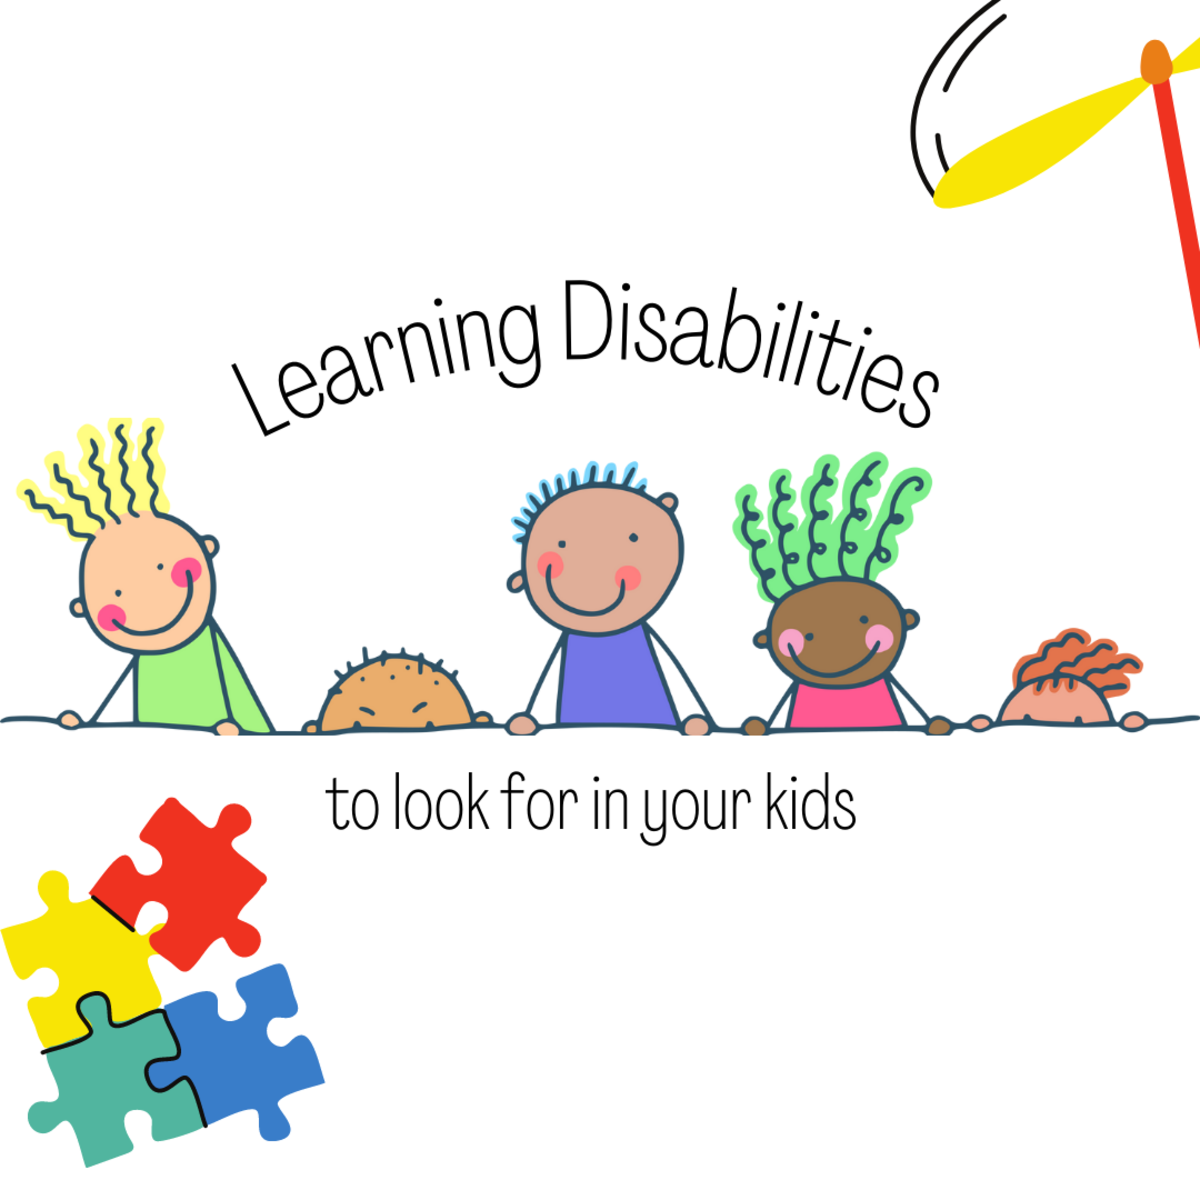 What are Learning Disabilities? 7 types of learning disabilities to look for in your kids.